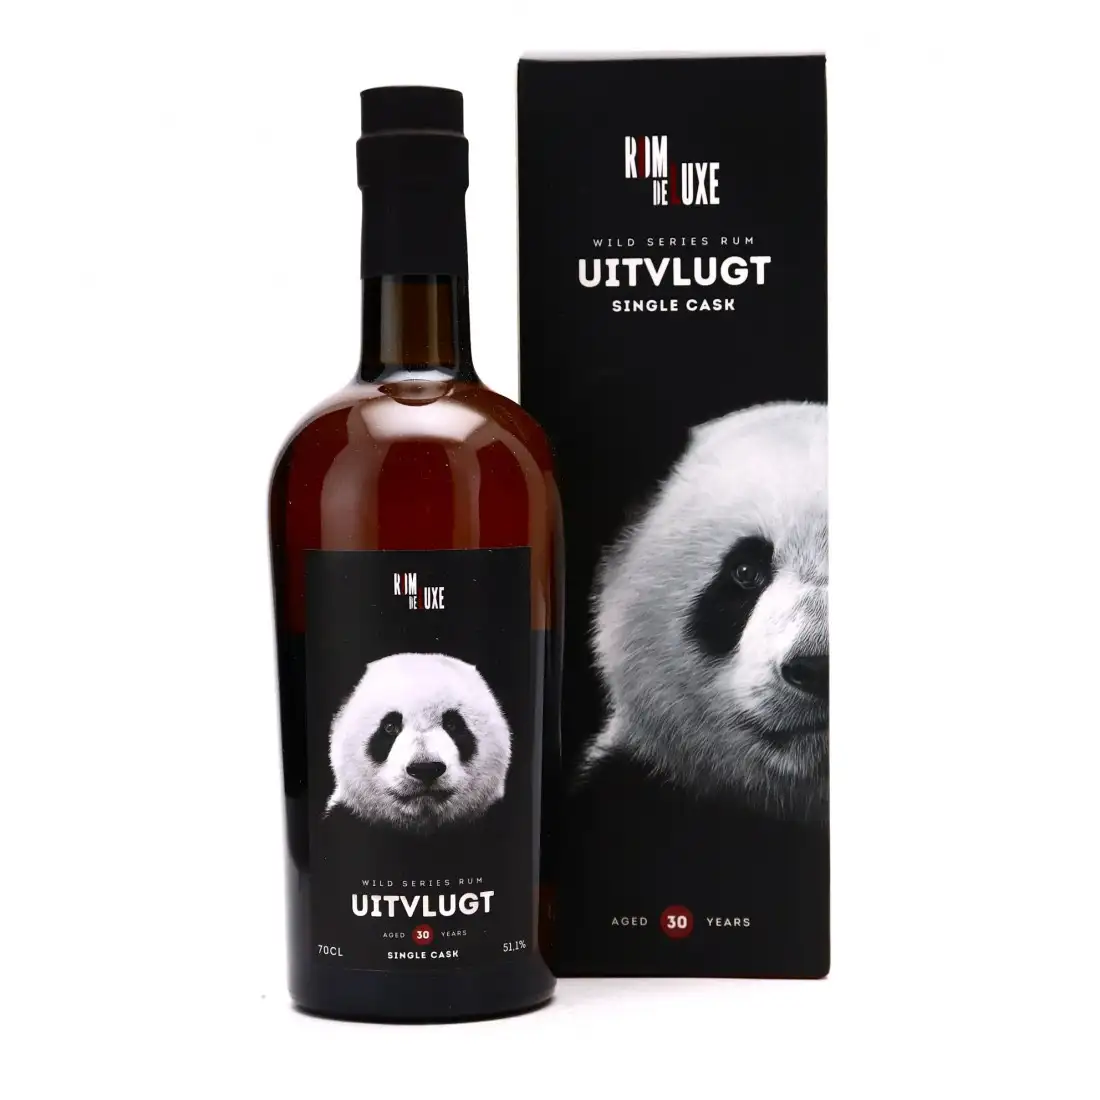 Image of the front of the bottle of the rum Wild Series Rum Uitvlugt No. 19 MPM